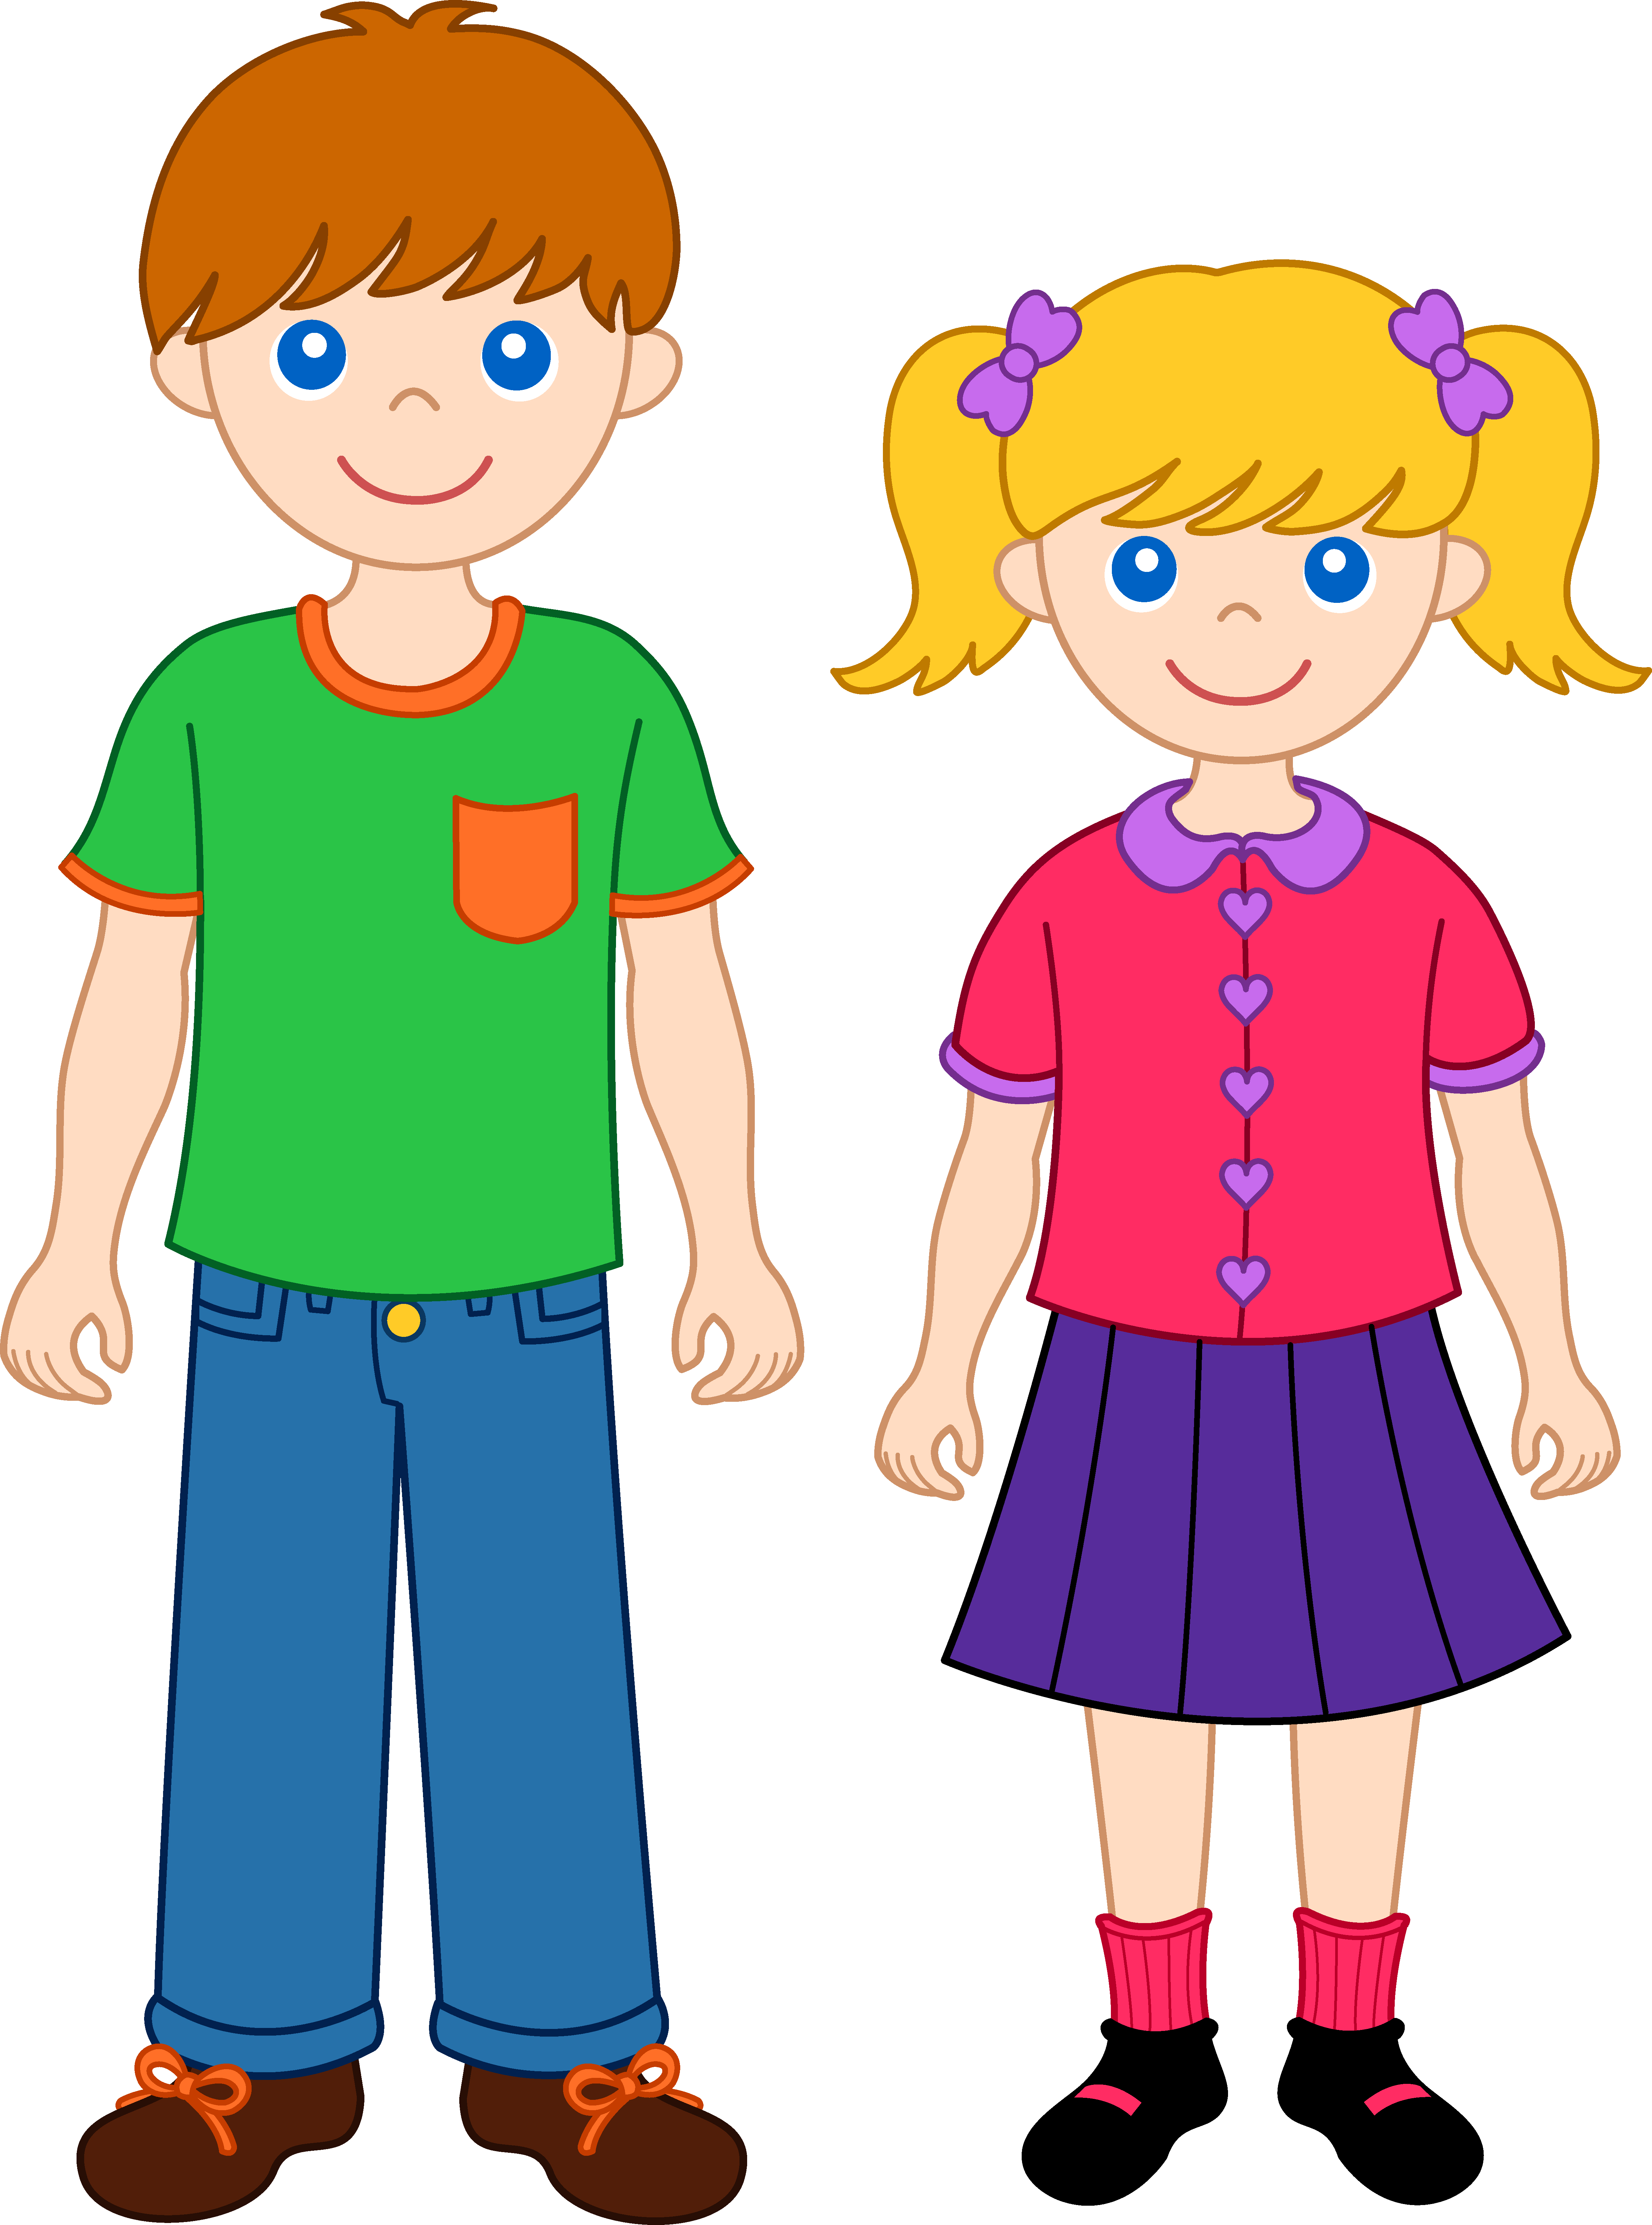 Free Cliparts Toddler Siblings, Download Free Cliparts Toddler Siblings